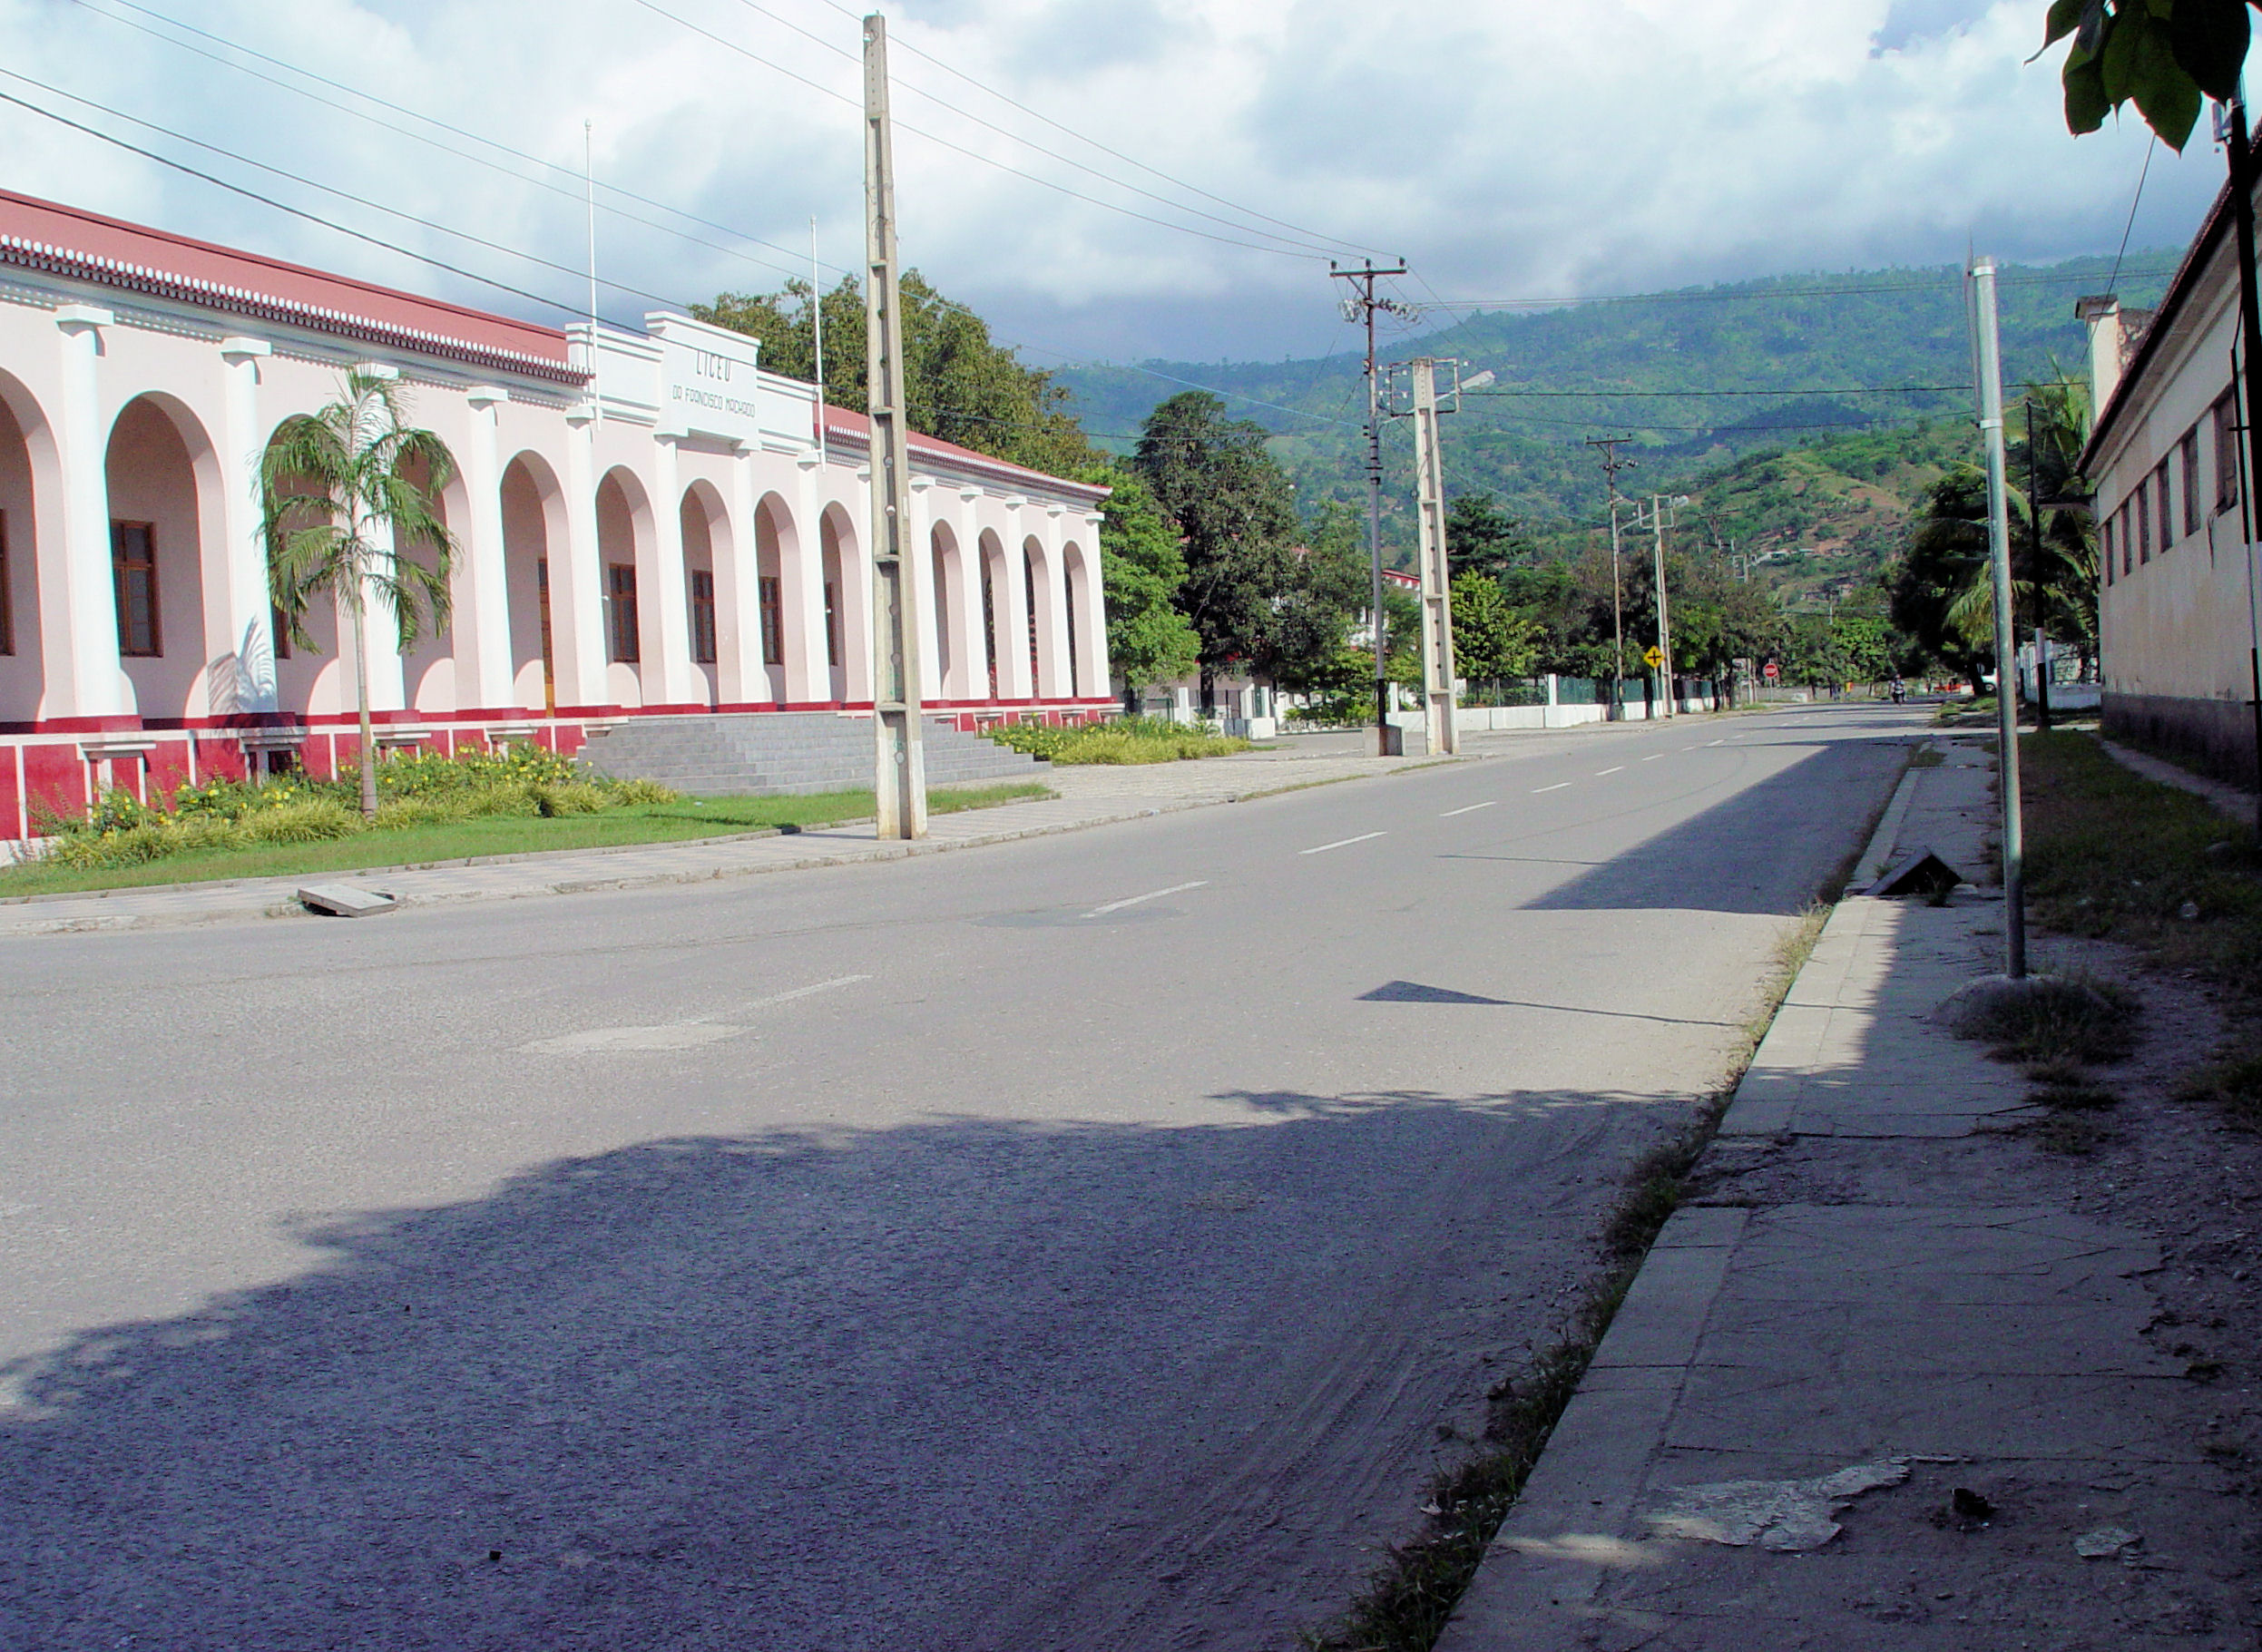 The Places of Eat Timor -Deserted streets of Downtown Dili during civil strife on April 28